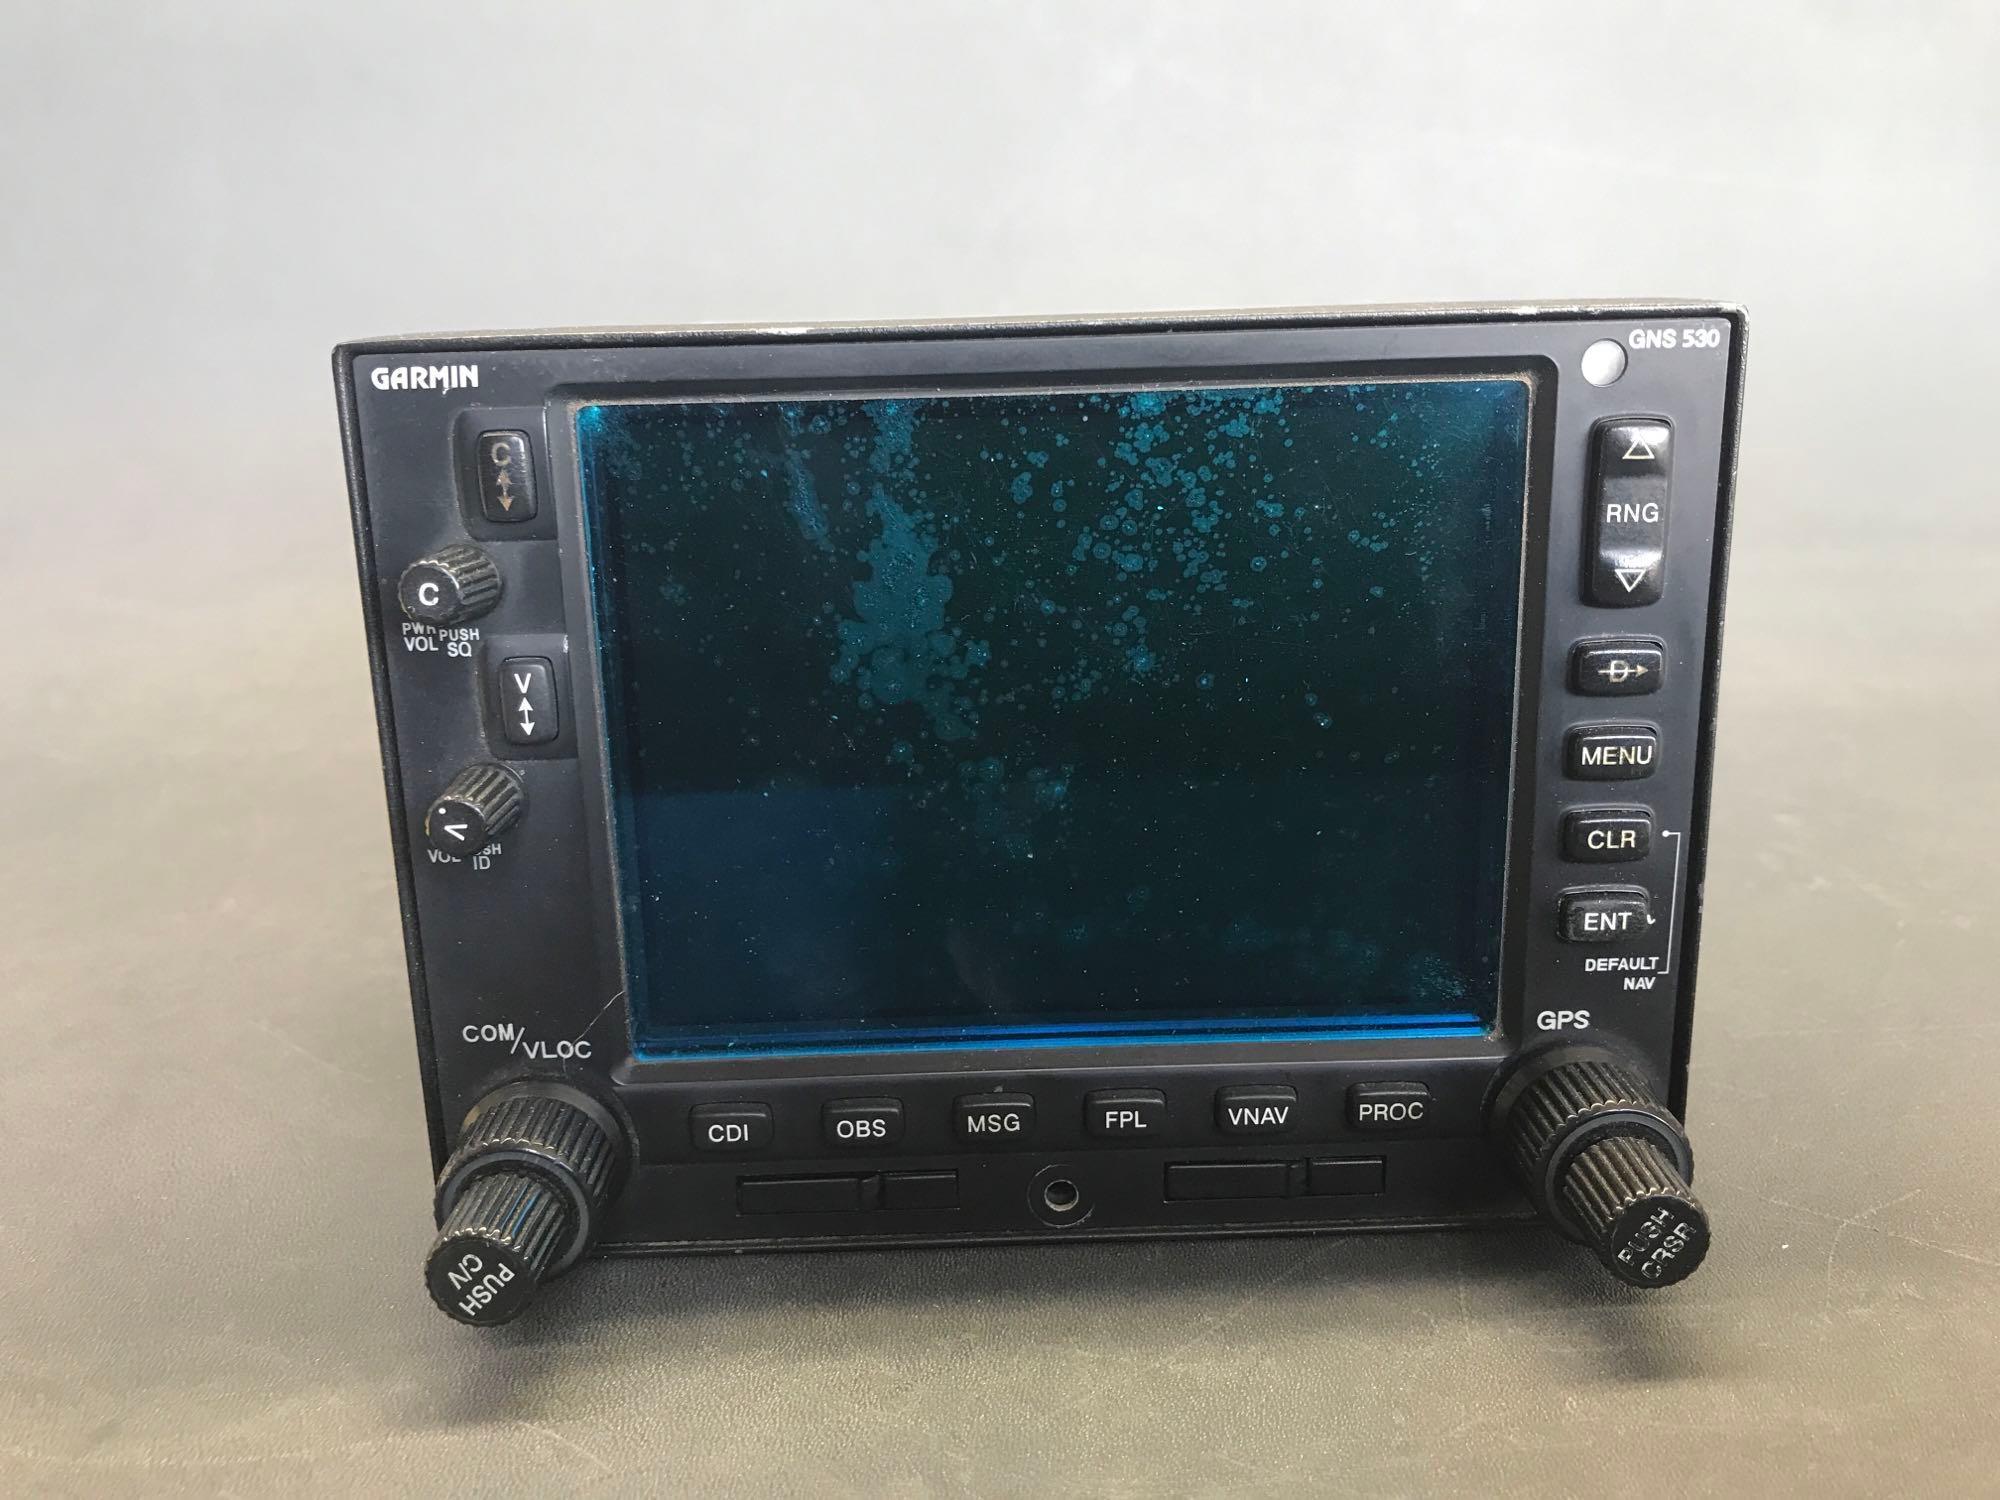 GARMIN GNS530W WITH TRAY, 011-01064-00 (AS REMOVED)